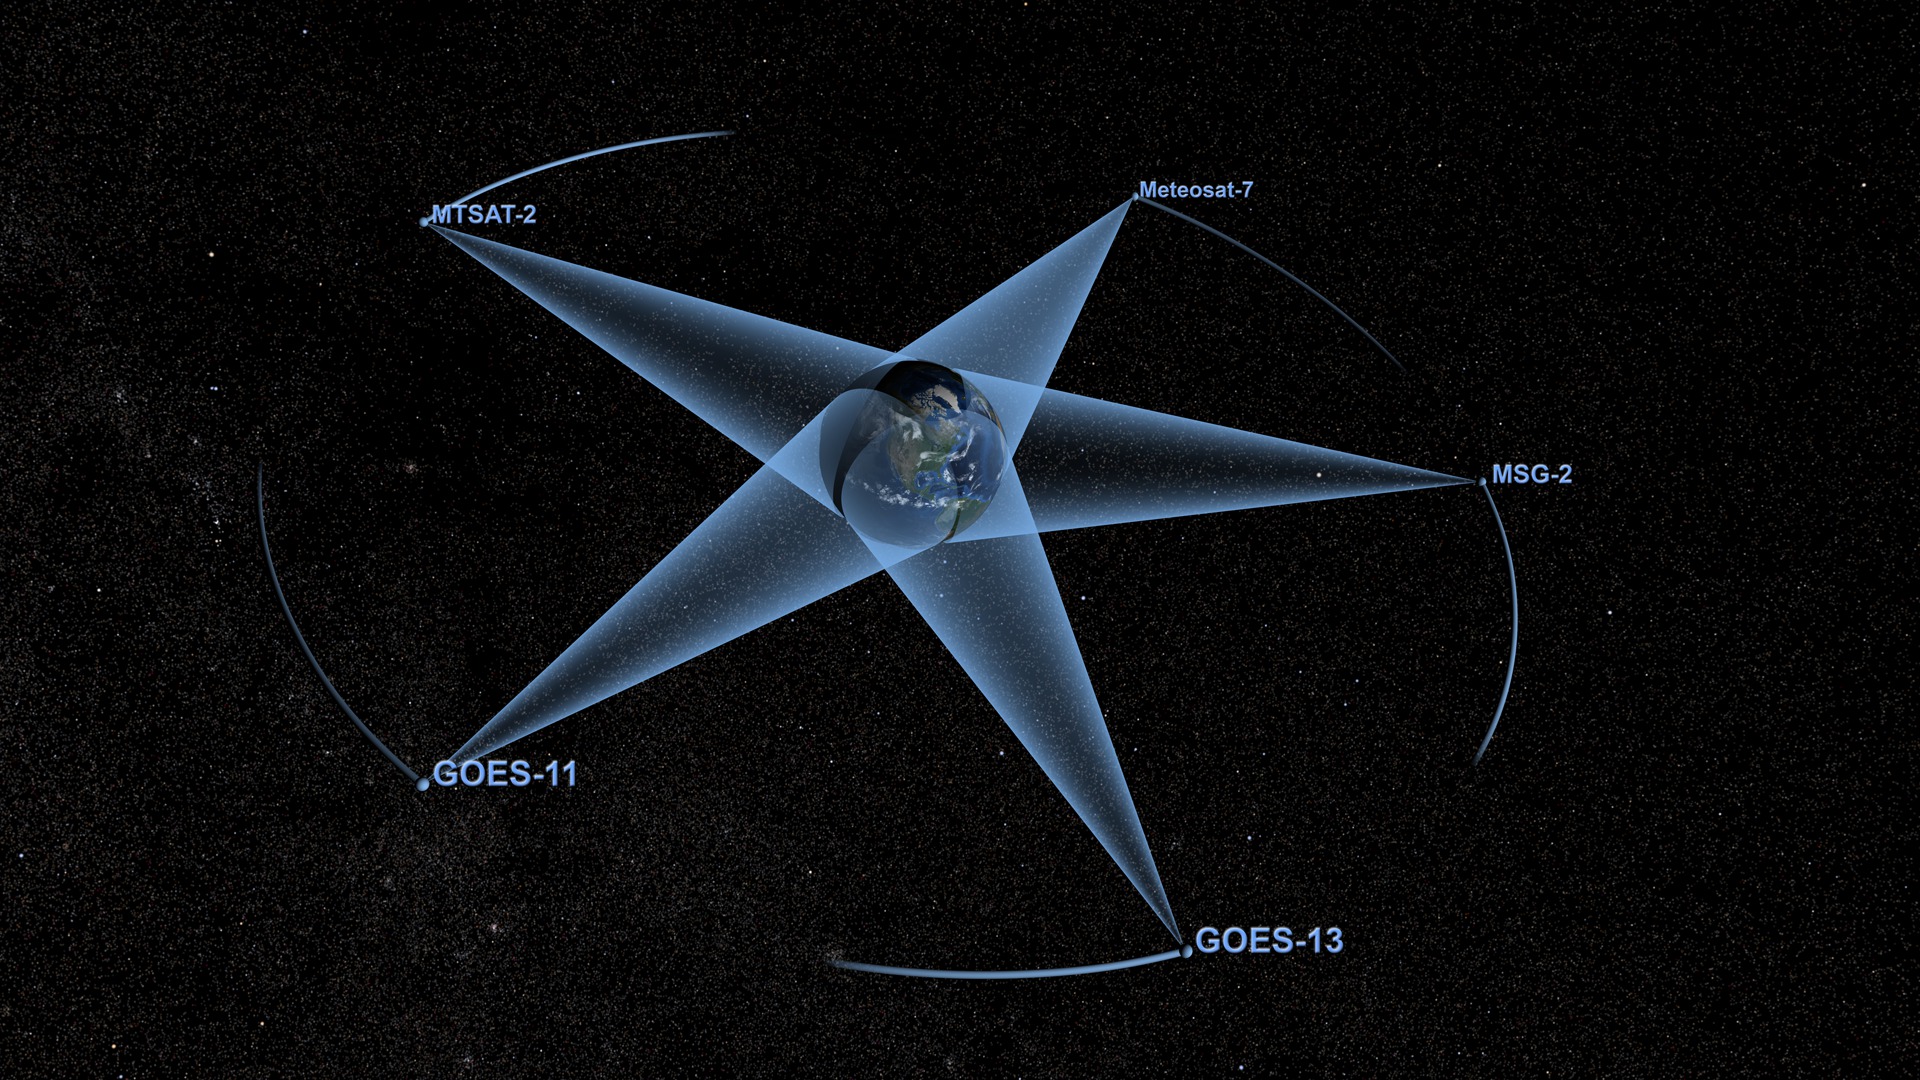 This set provides movies and frames of the Weather Satellites in Orbit visualization.